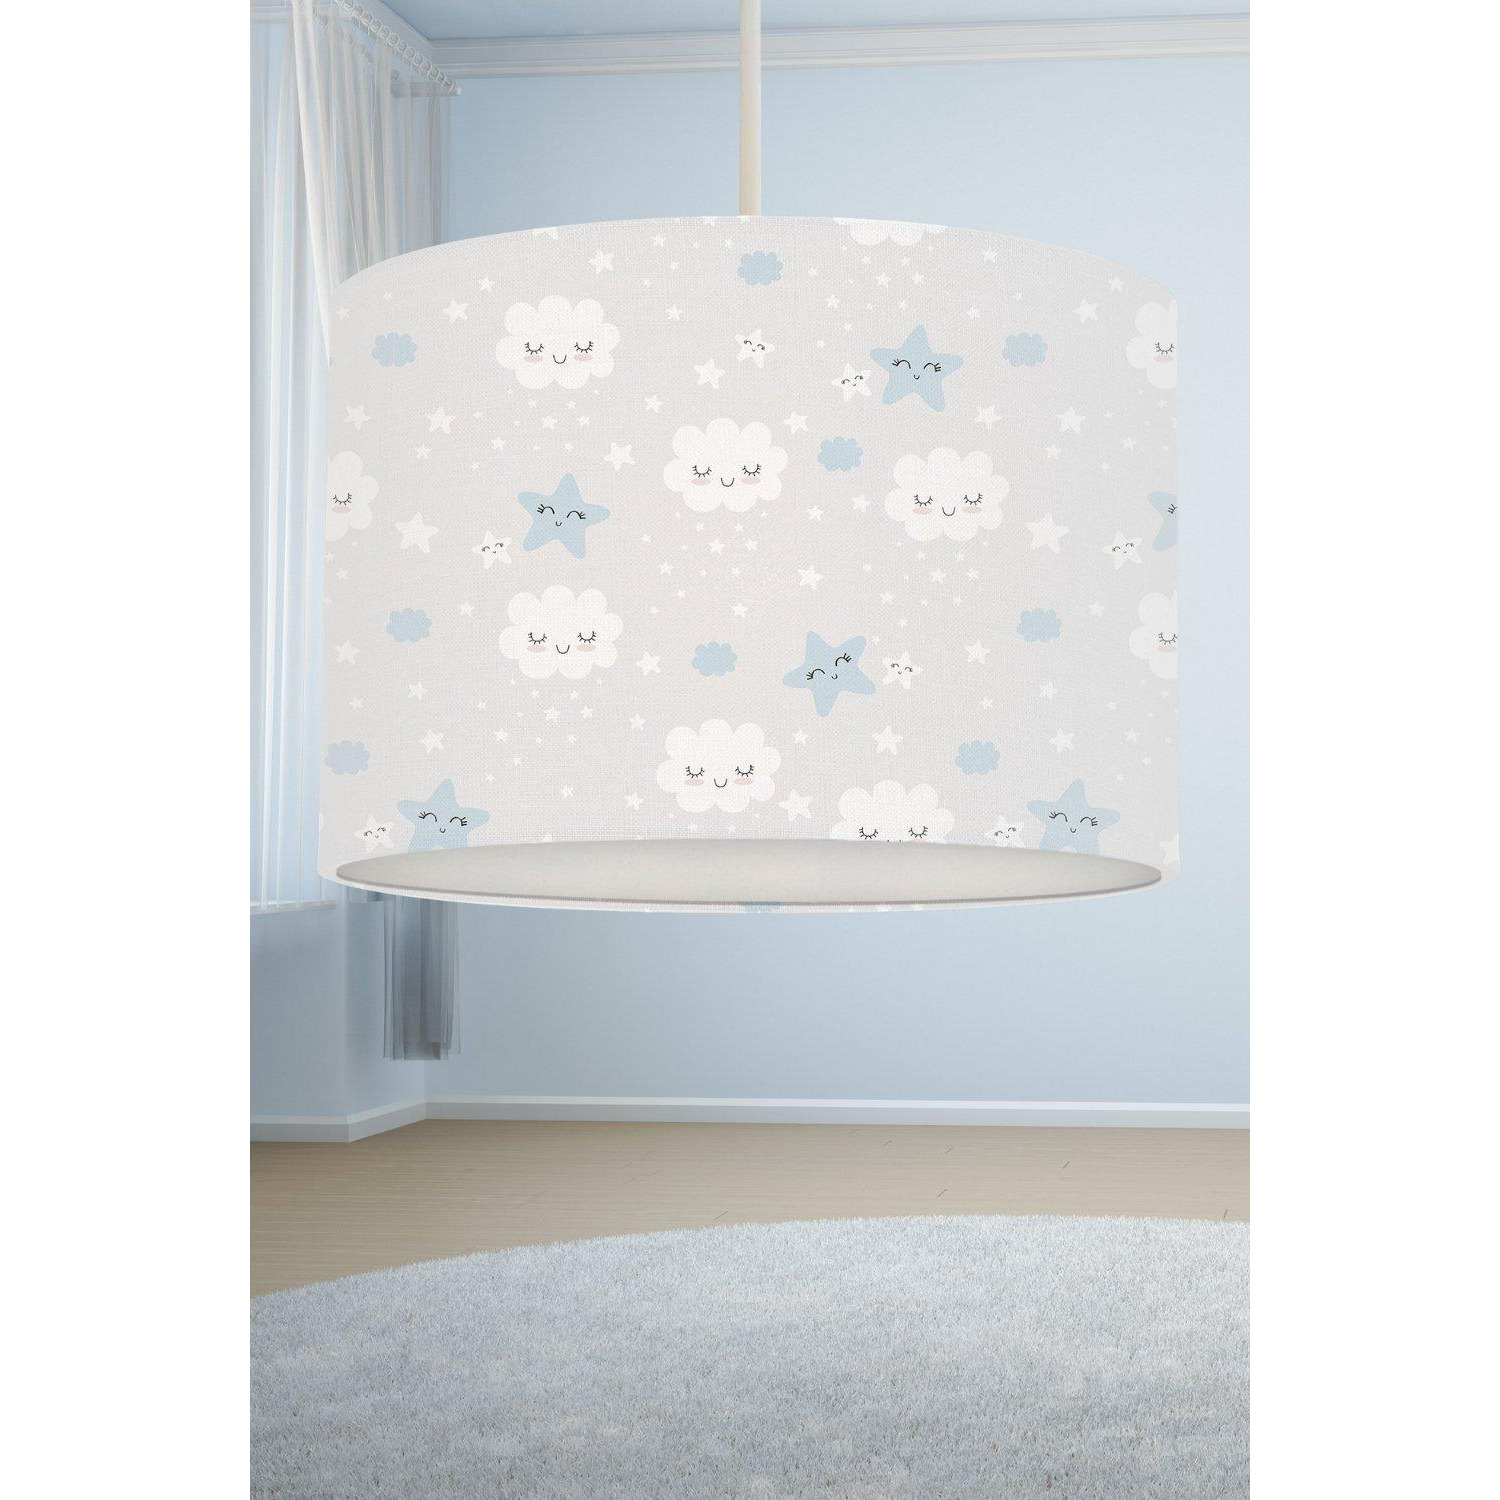 Smiling Clouds and Stars Lampshade Grey - image 1